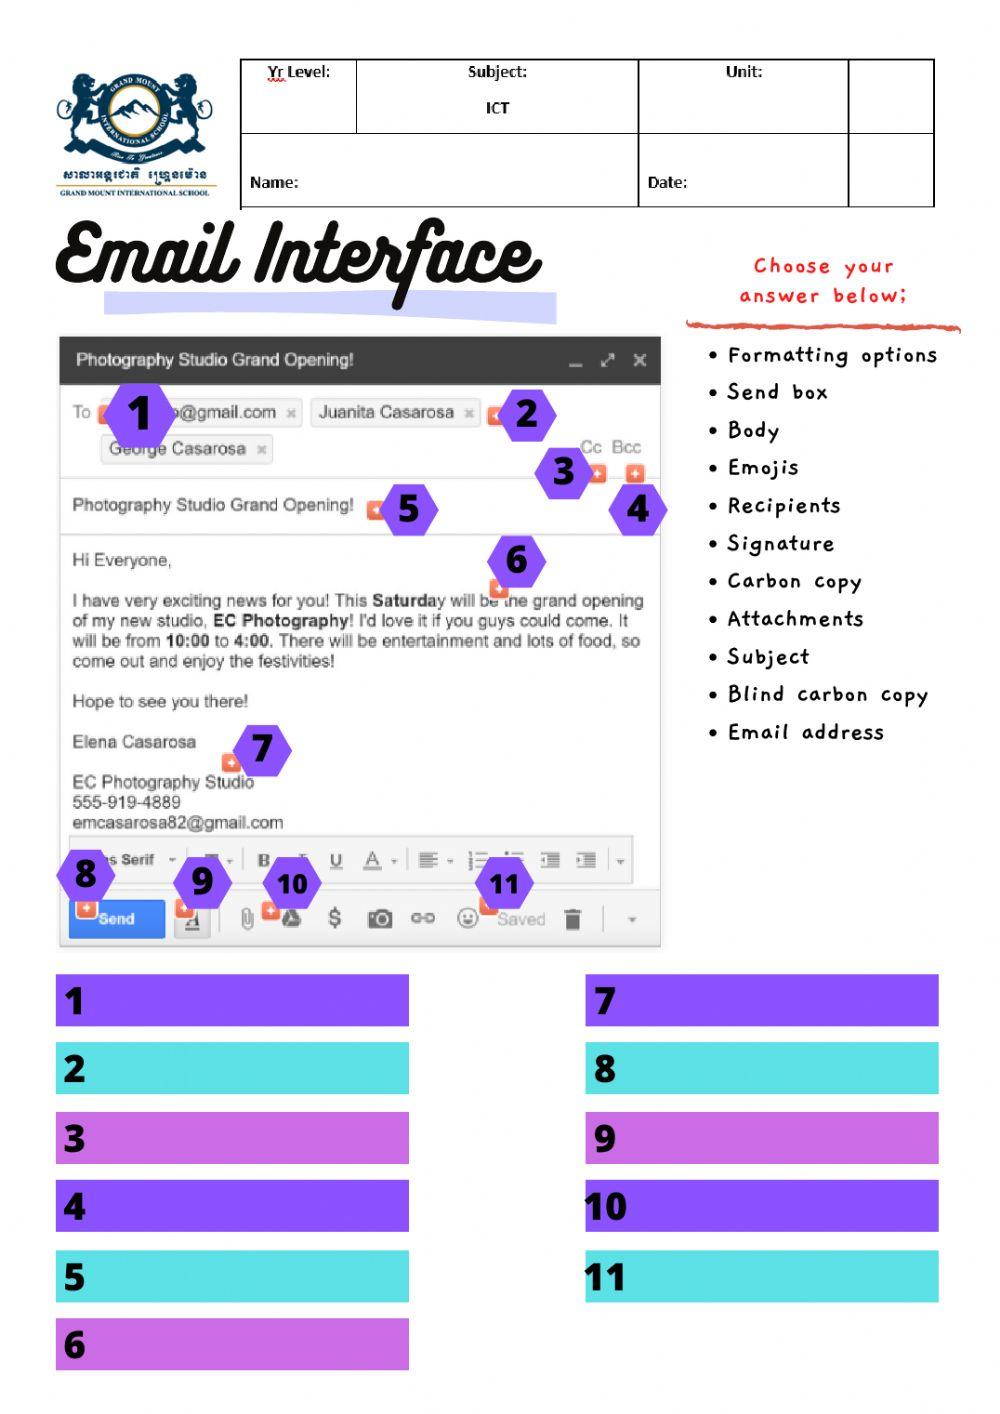 Email Interface